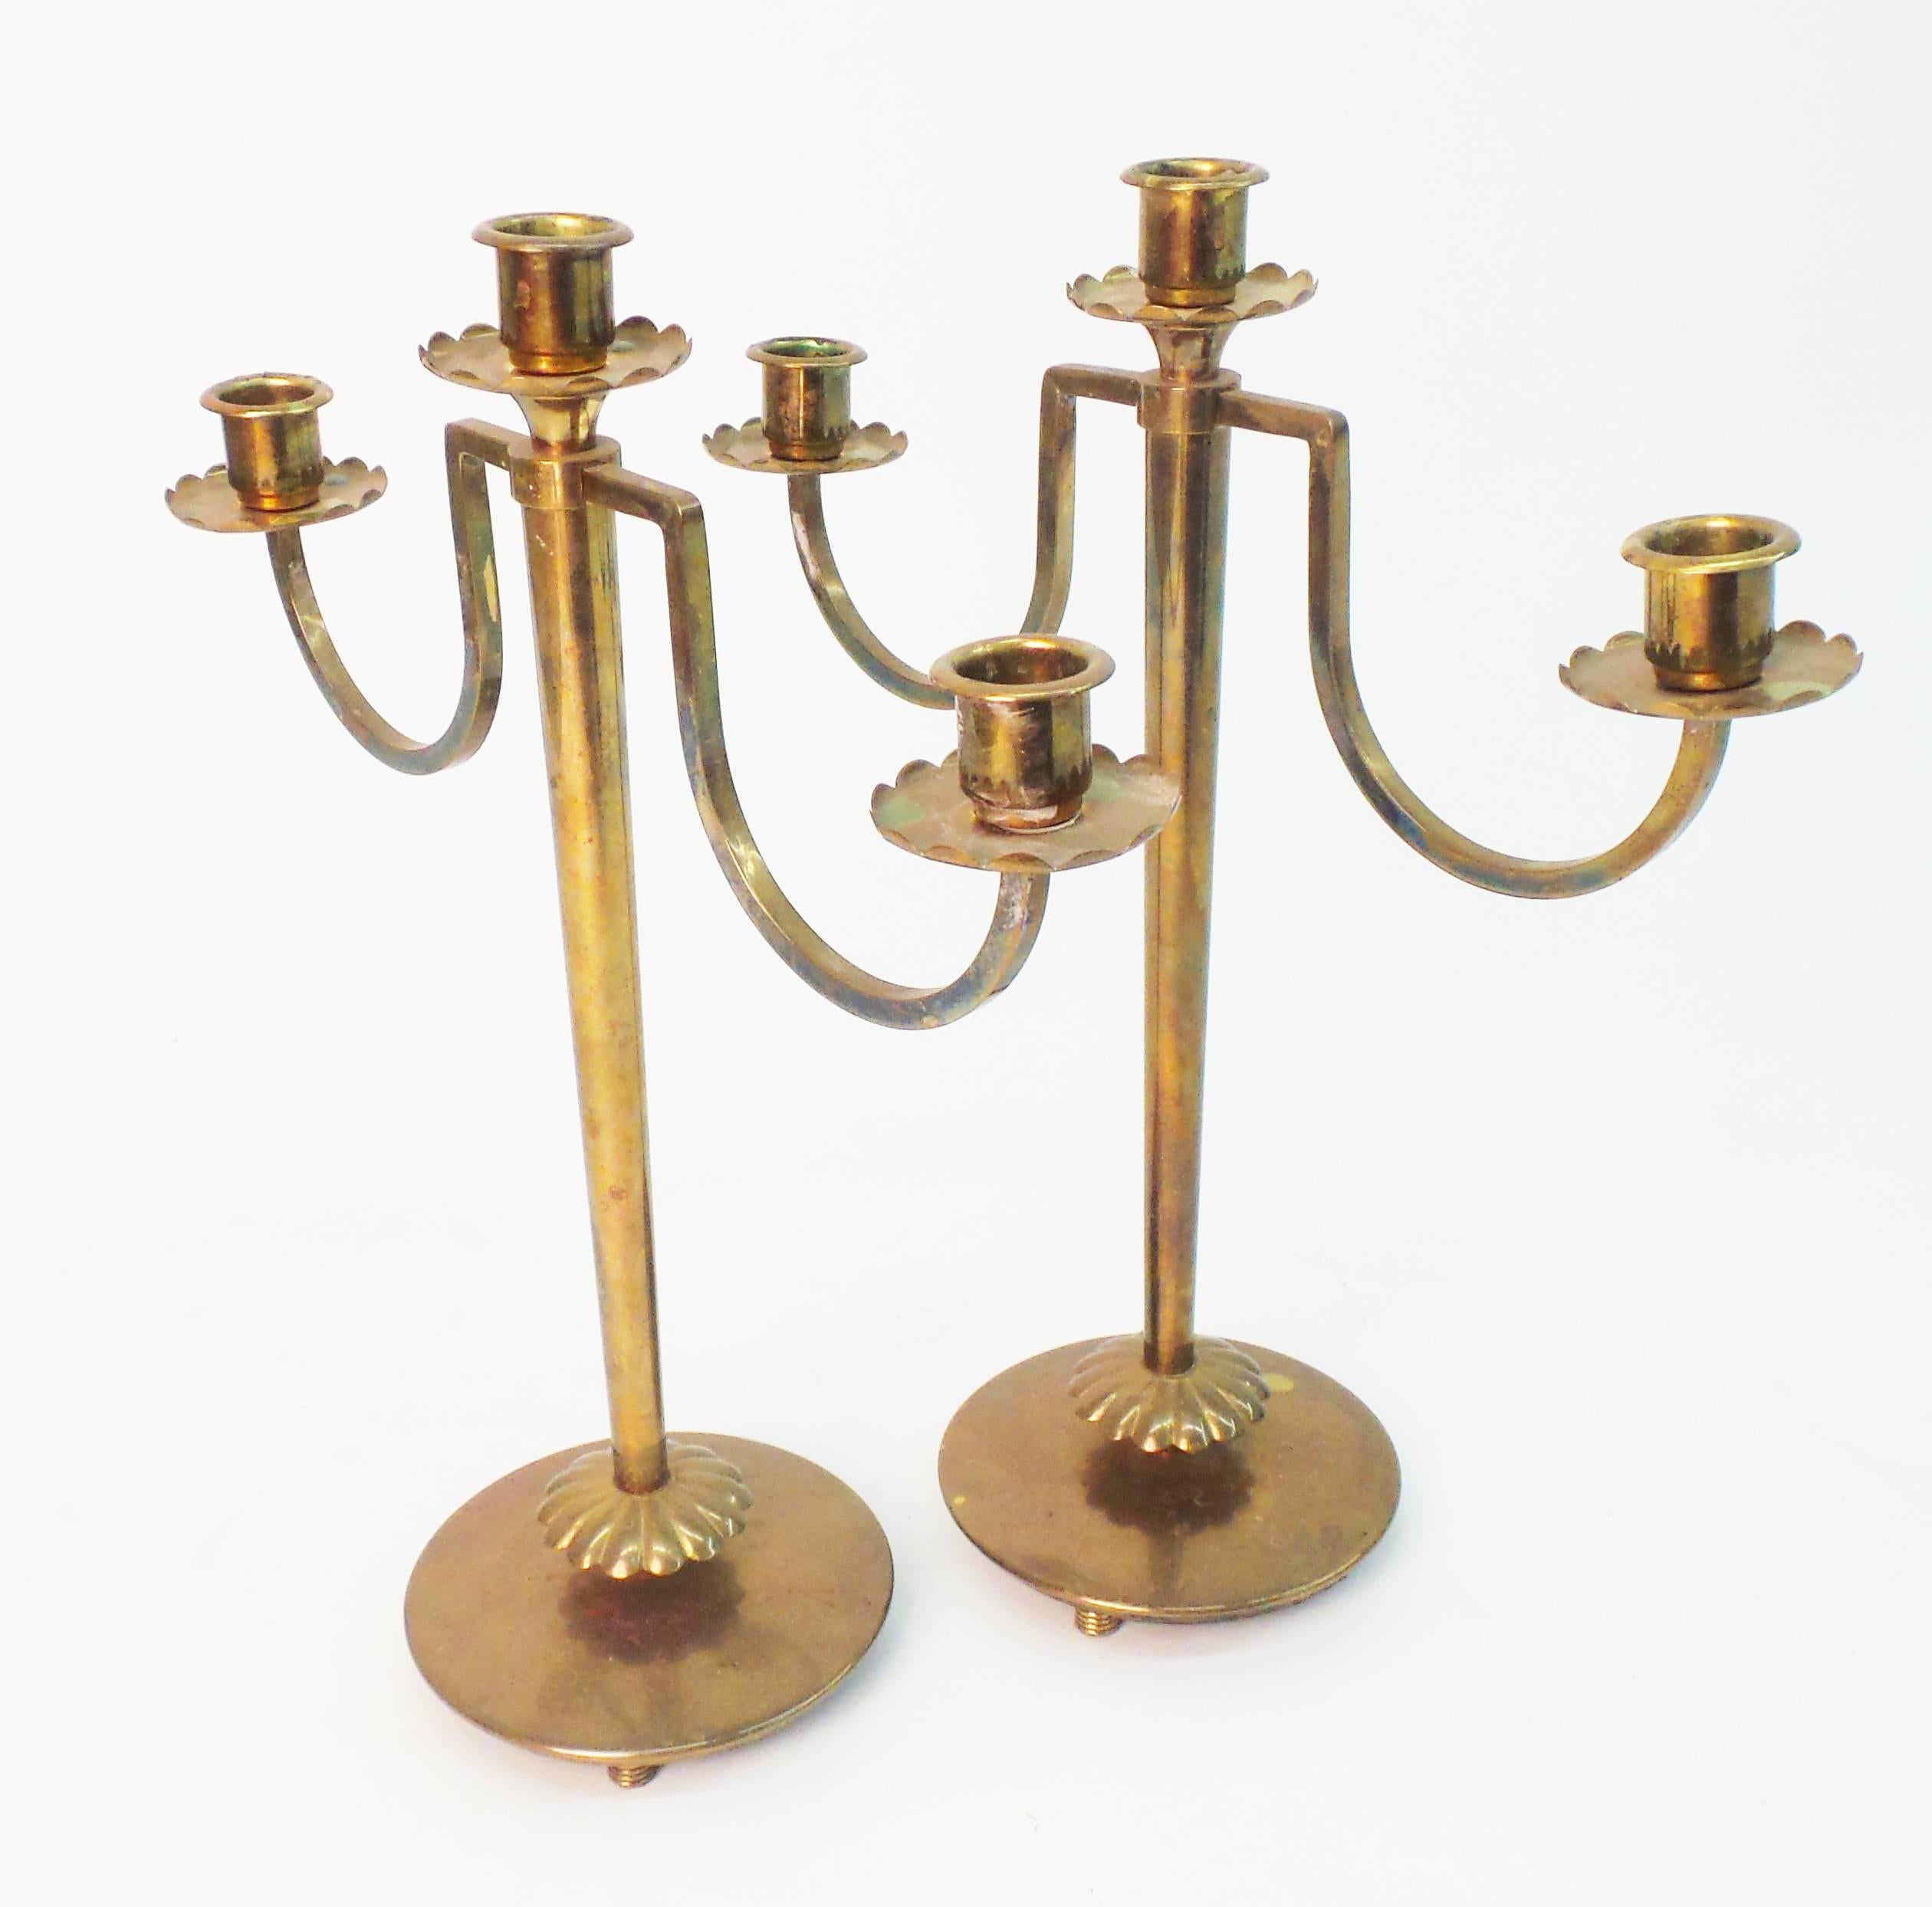 A pair of American, Art Deco period three-light candelabra designed by Walter Von Nessen and executed in brass. Signed and hall-marked 'Chase', circa 1930. The Chase Brass and Copper Co. was founded in Waterbury, Ct., in 1876.